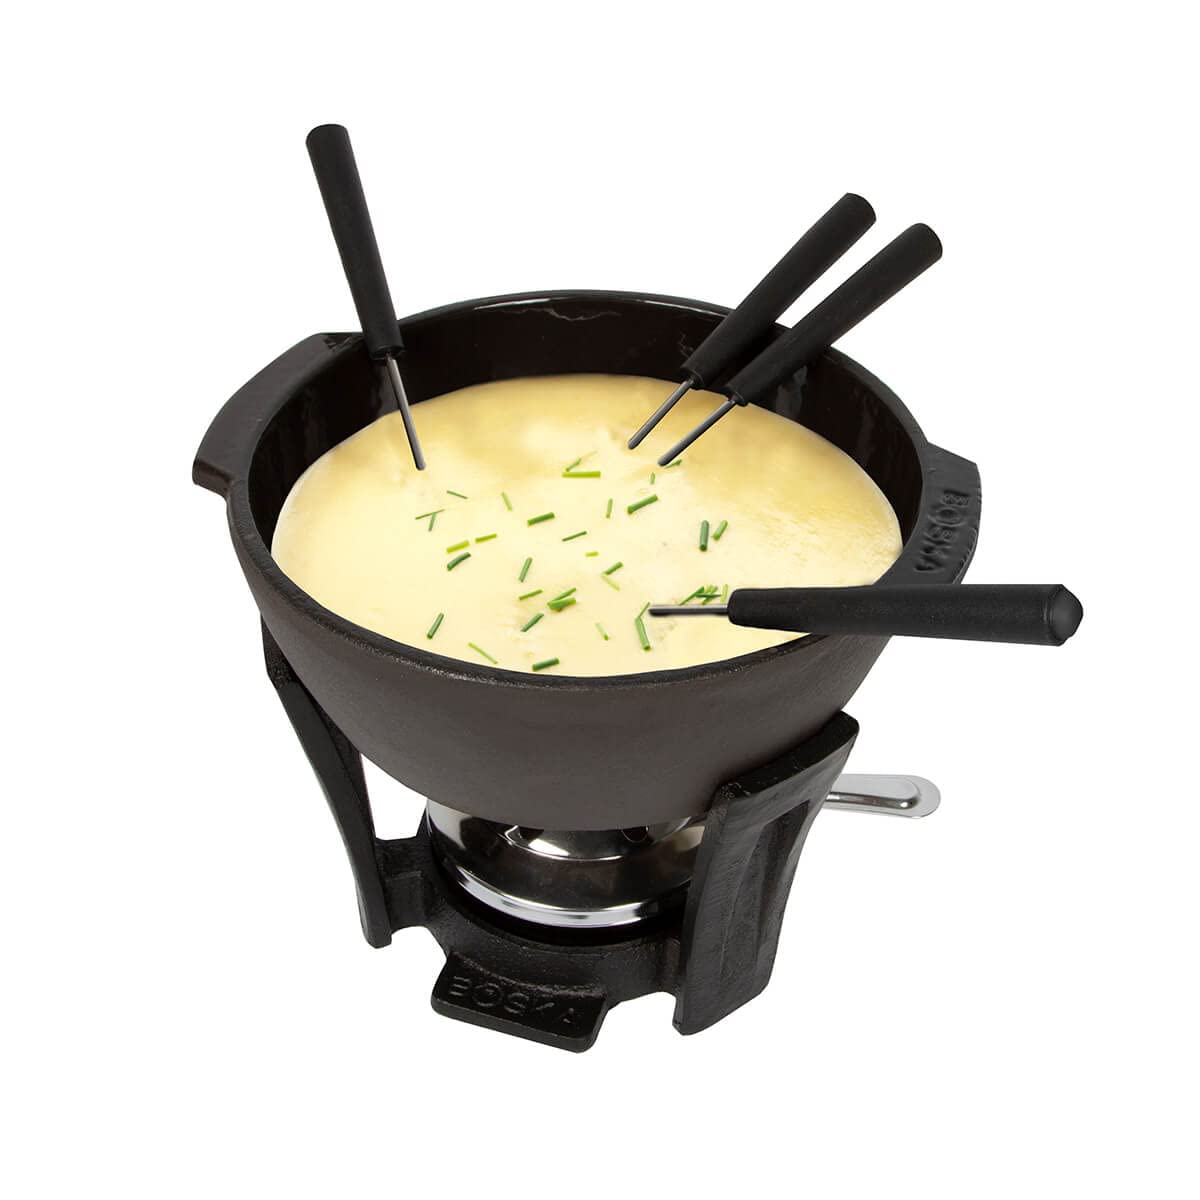 Boska Cheese Fondue Party Set - Black Cast Iron Fondue Pot for Cheese, Meat, and Chocolate - Suitable for Every Stove - Wedding Registry Items for up to 4 Persons